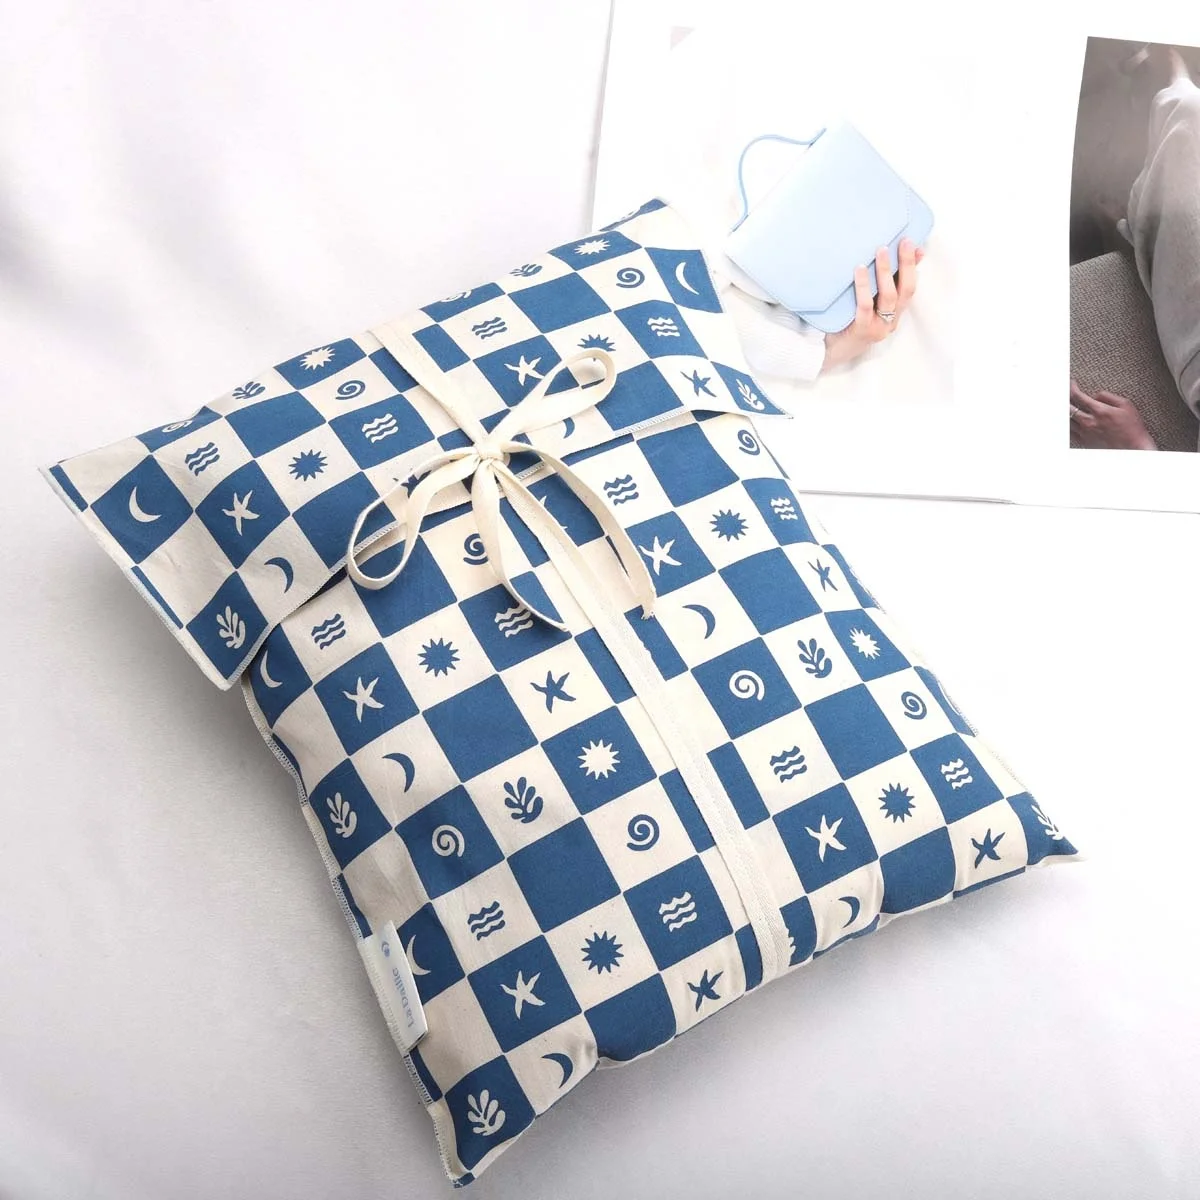 OEM Factory Digital Printed Cotton Muslin Envelope Dust Pouch For T-shirt Packing Reusable Clothing  Packing Dust Cotton Pouch